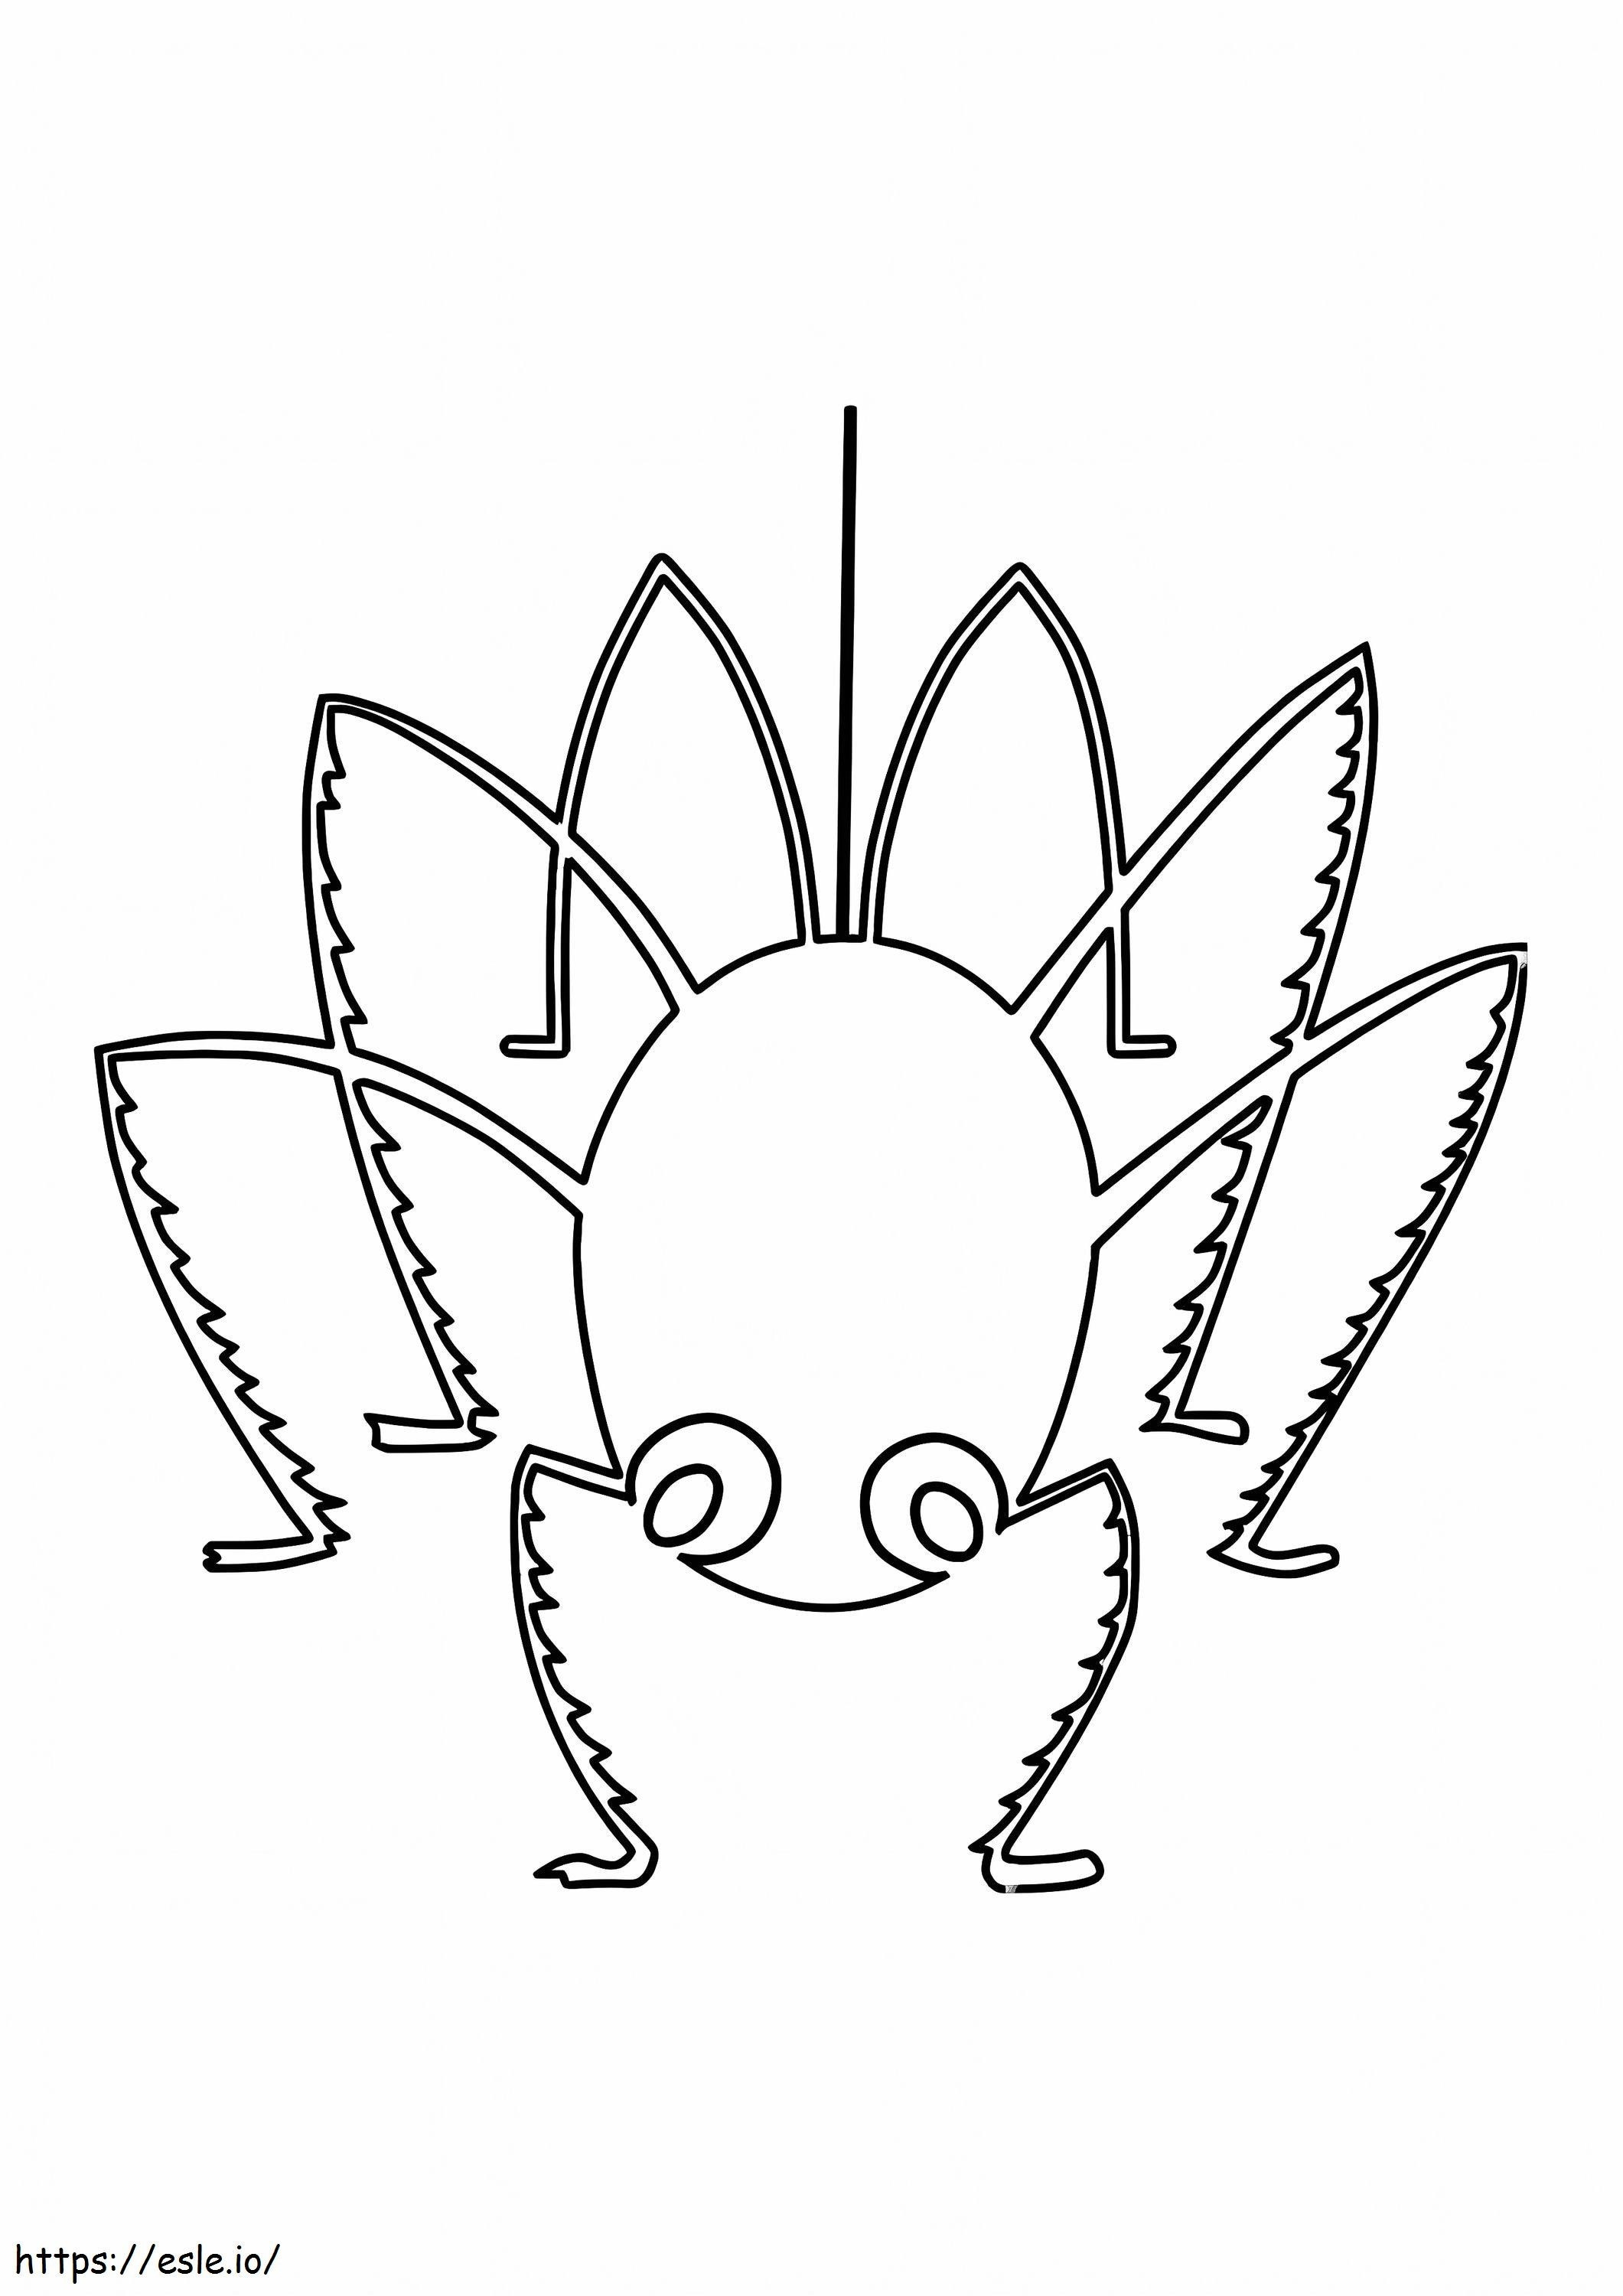 Sweet Spider coloring page